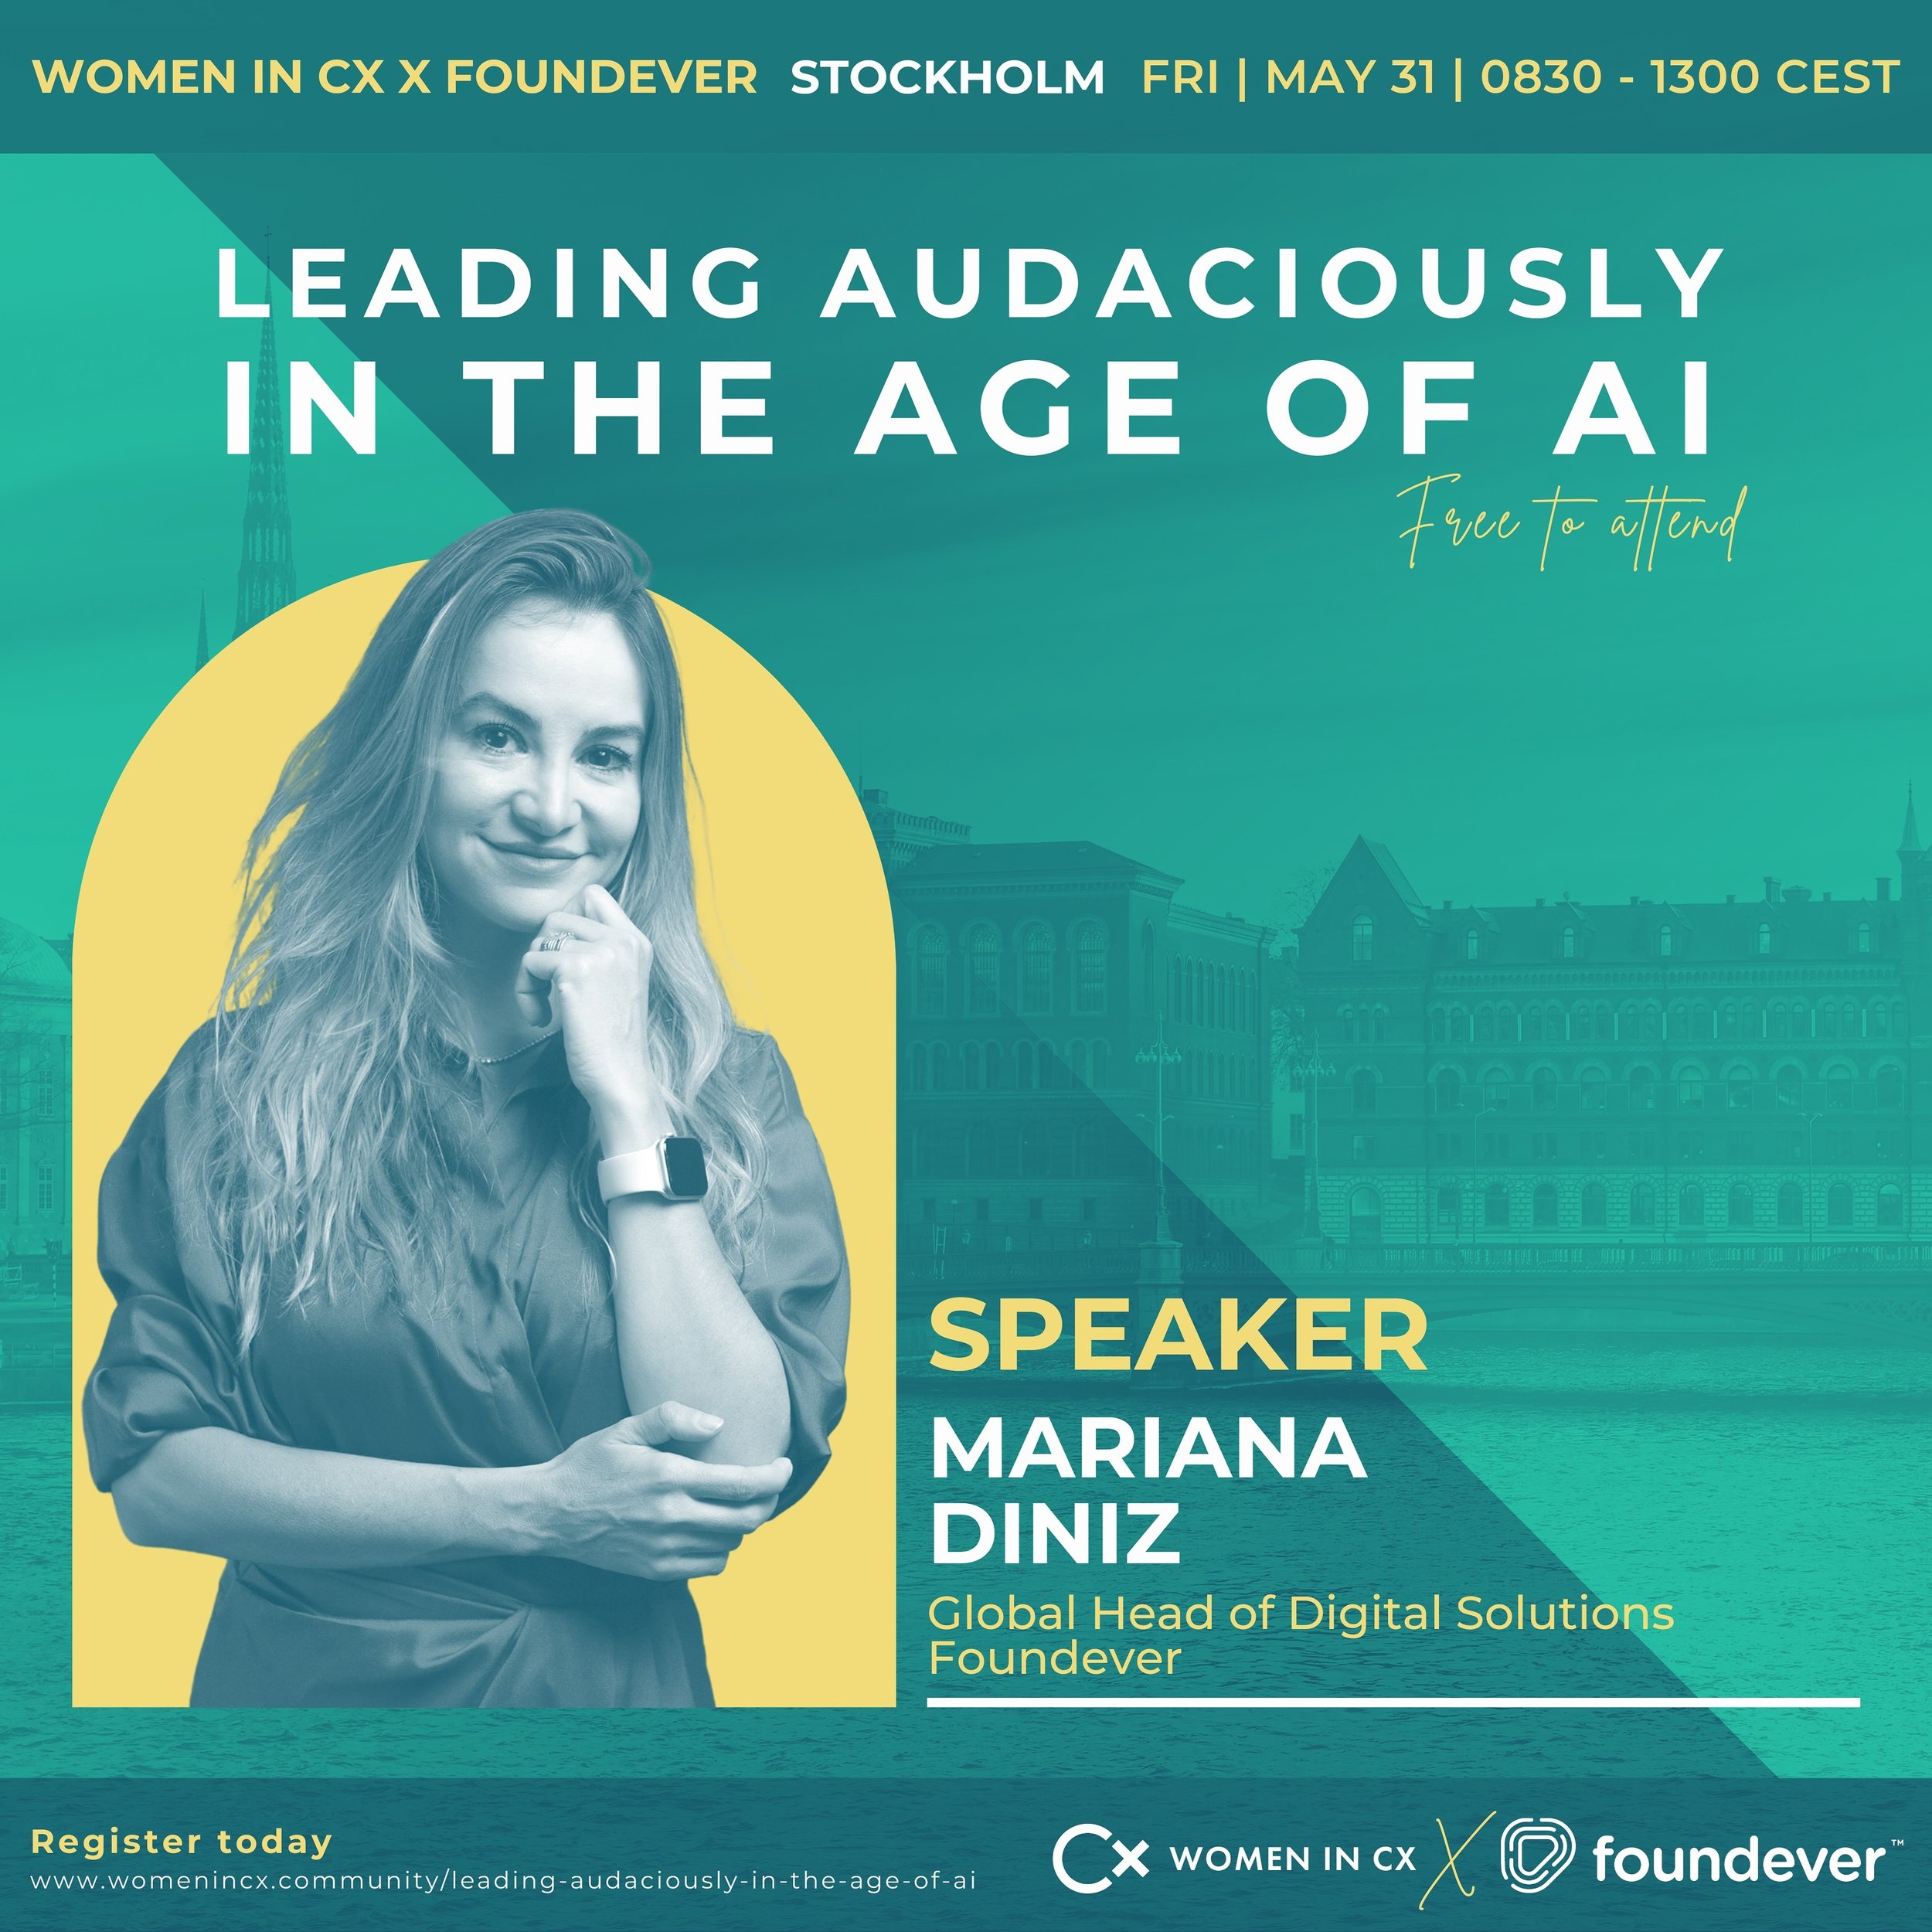 Meet Mariana⚡
&nbsp;
Taking to the stage at our free upcoming event, &lsquo;Leading Audaciously in the Age of AI&rsquo;, join Mariana Diniz, Global Head of Digital Solutions at Foundever, for her masterclass, &lsquo;Leveraging AI to Augment the Agent